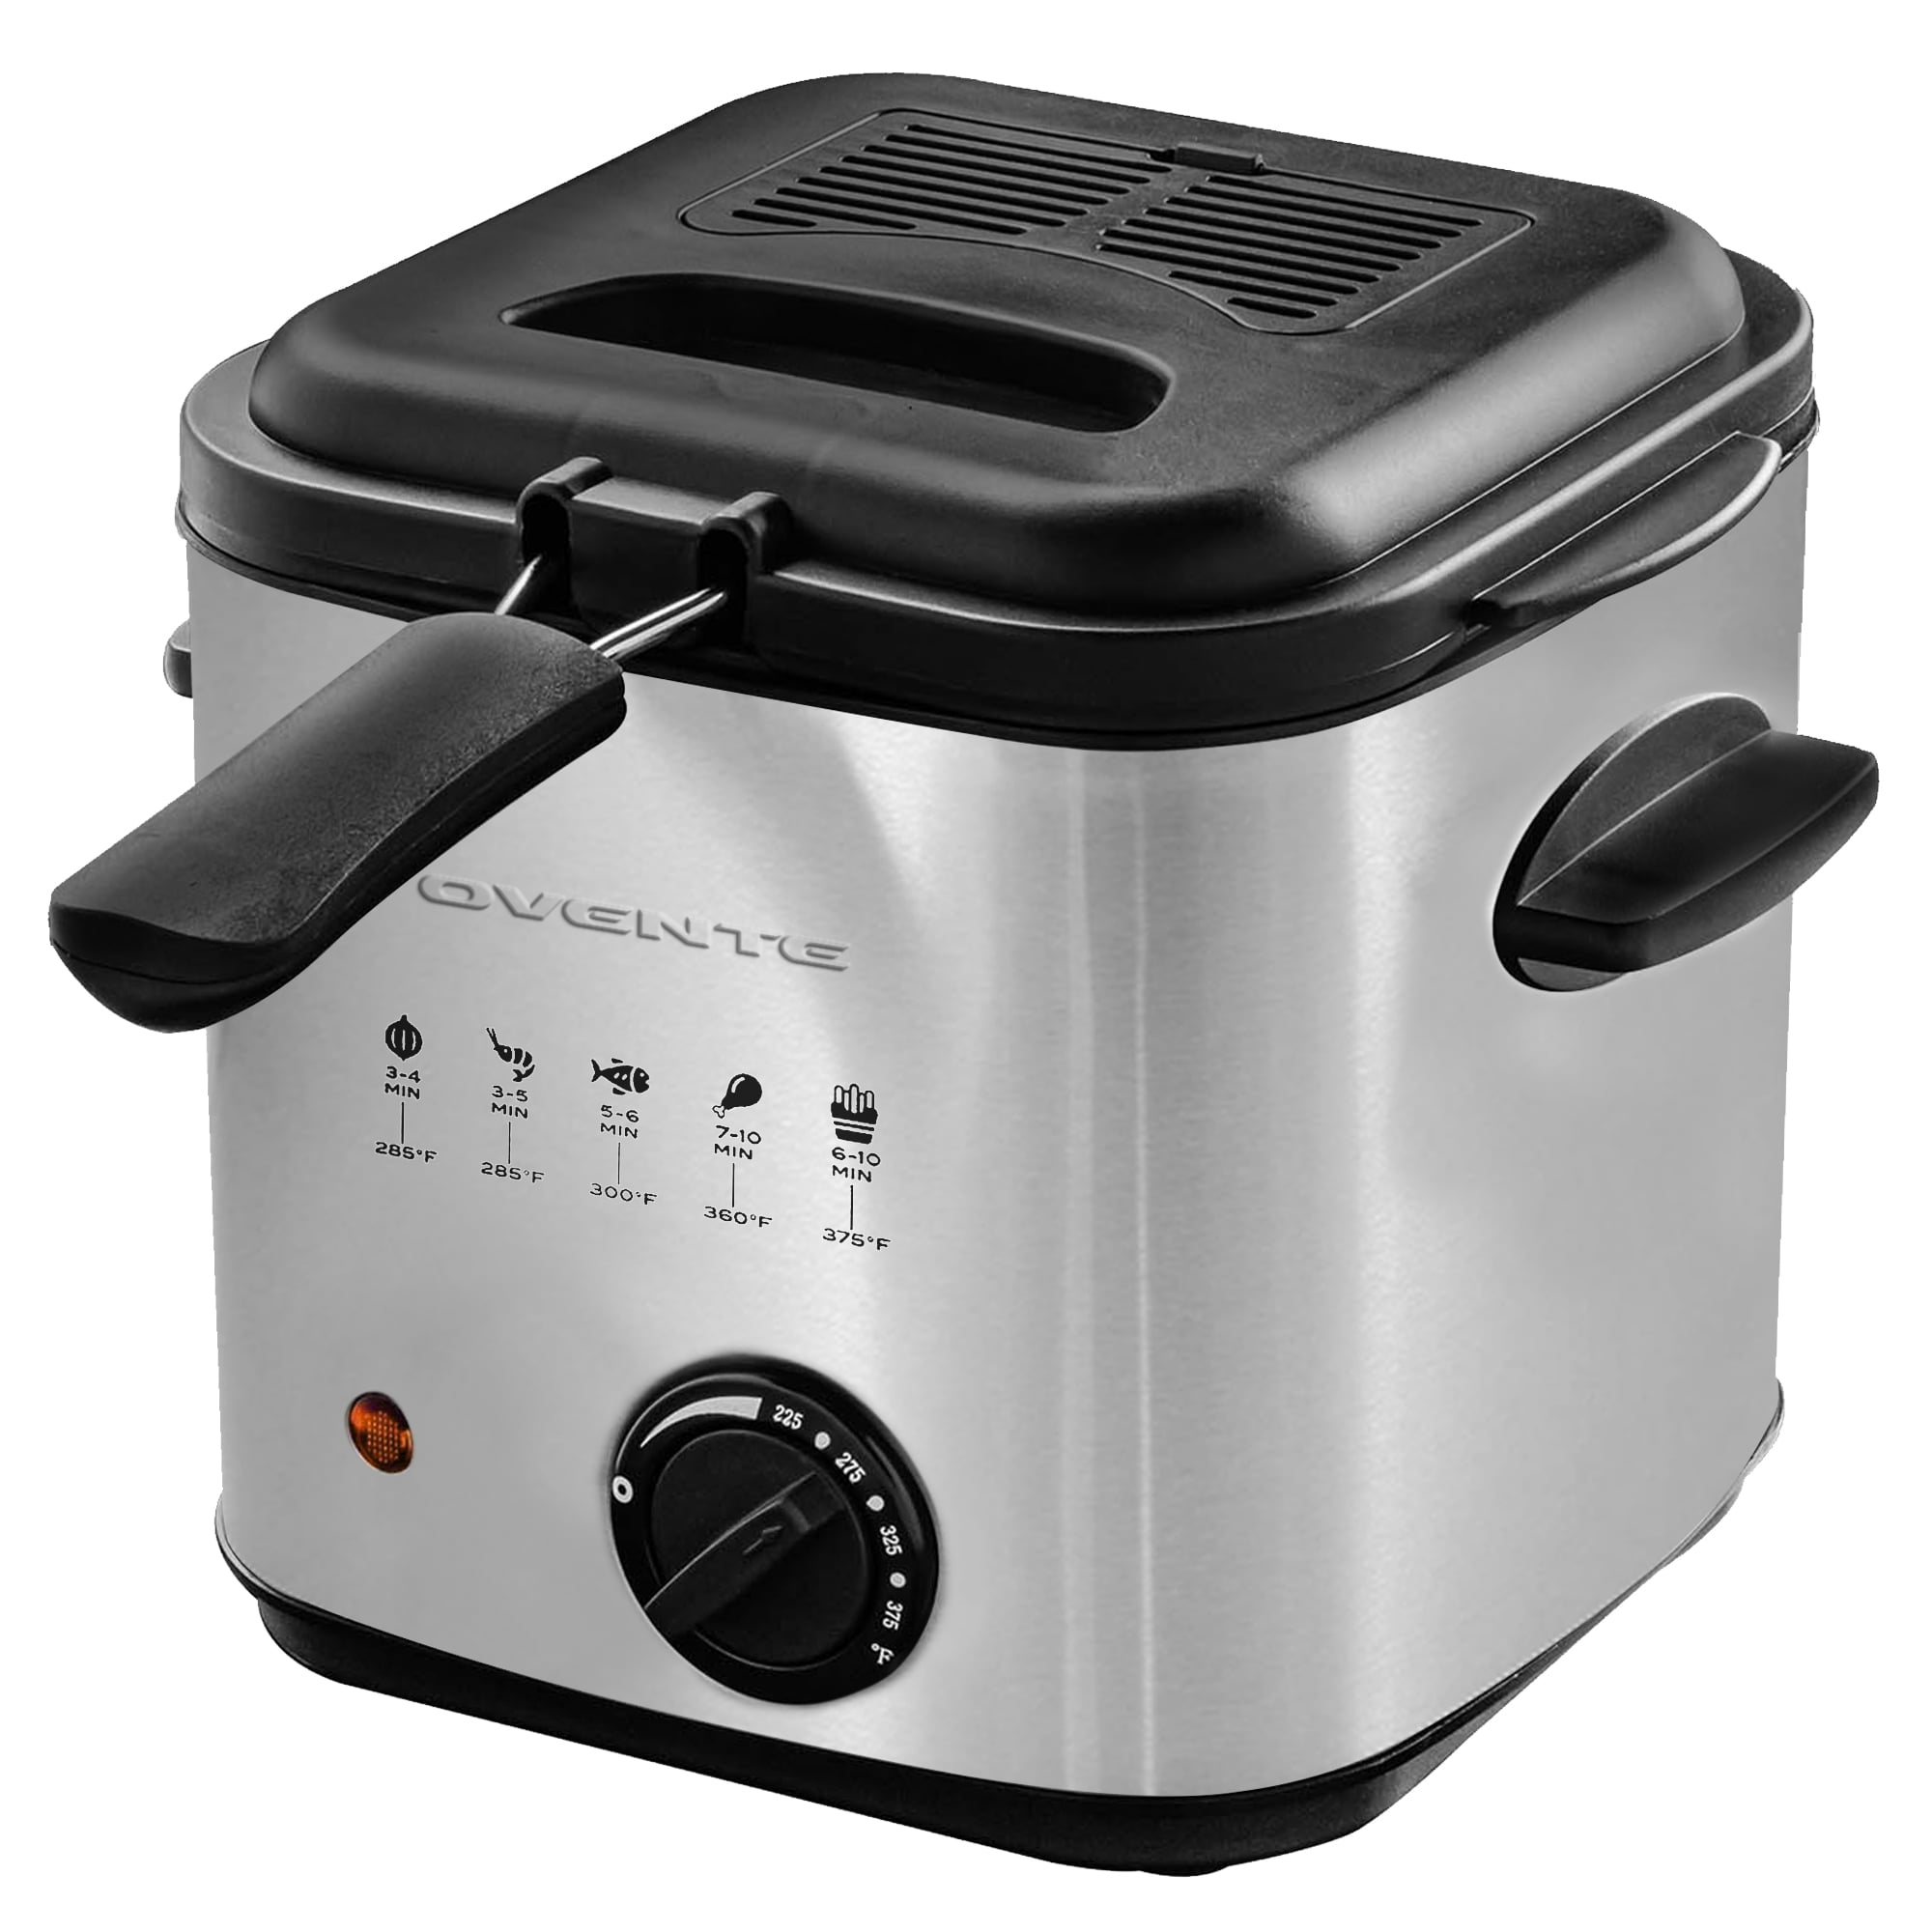 Ovente Electric Deep Fryer 1.5L Capacity with Removable Frying Basket FDM1501BR